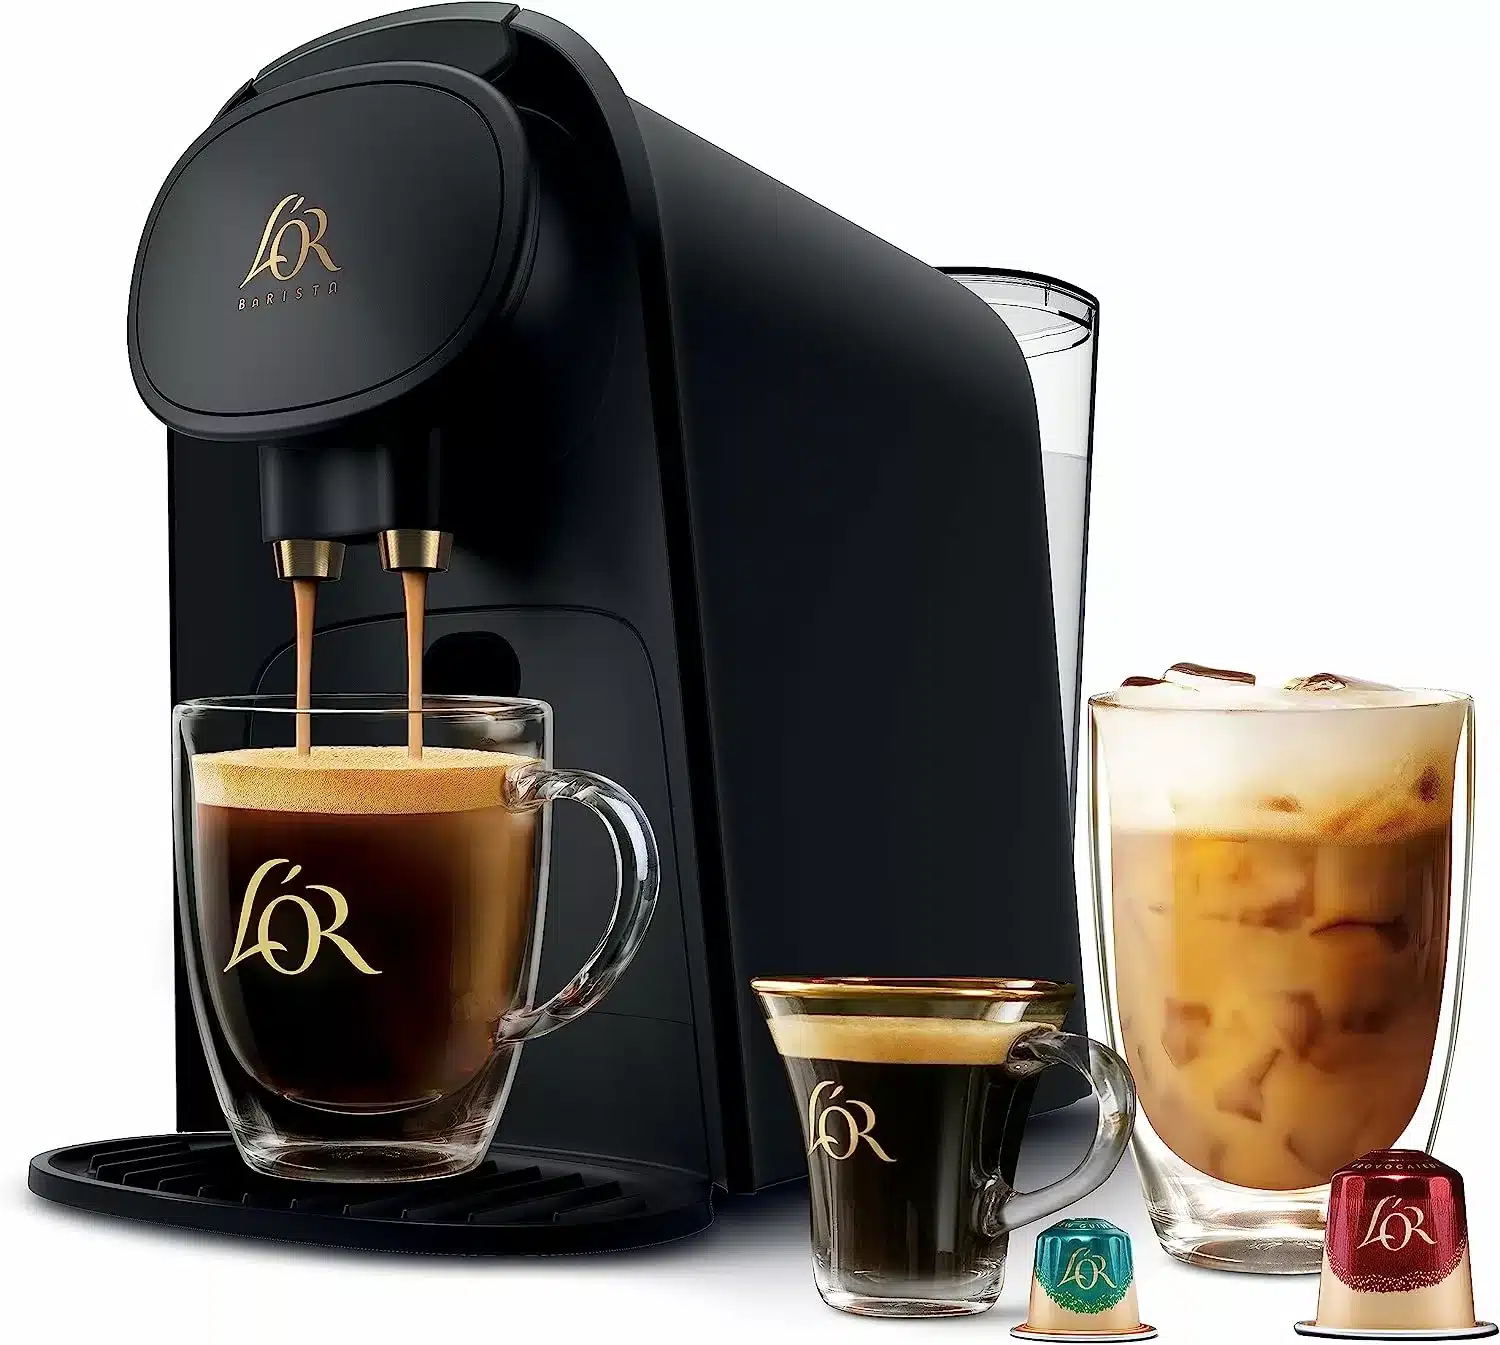 Black L'OR Barista coffee machine against a white background with different size glasses of coffee and two coffee pods